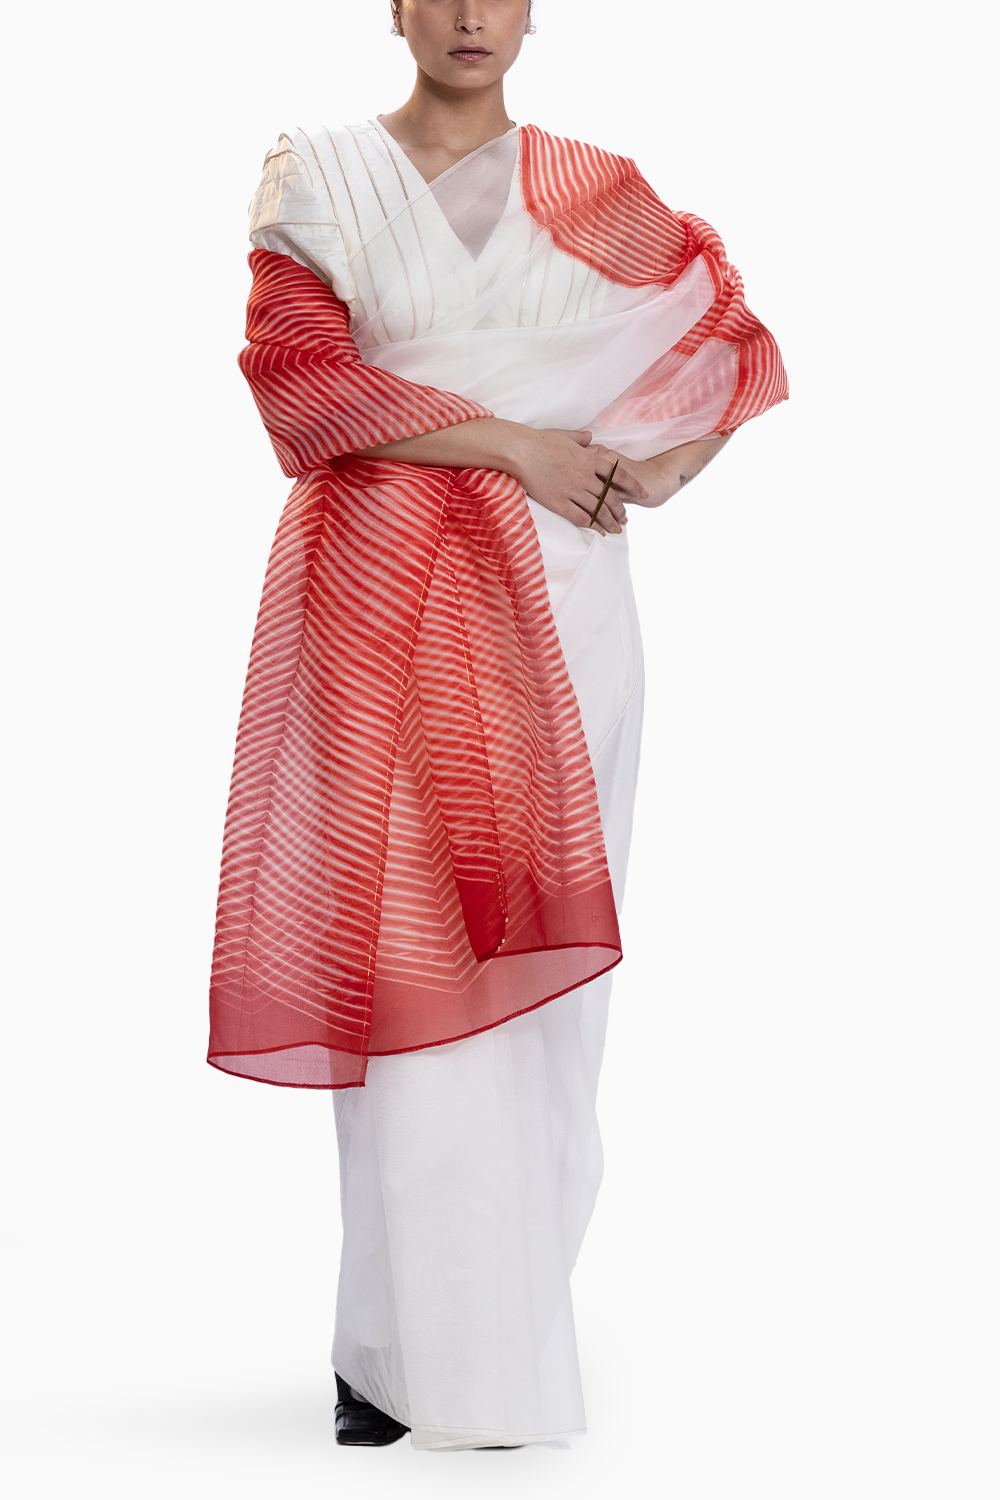 Ivory and Red Shore Saree